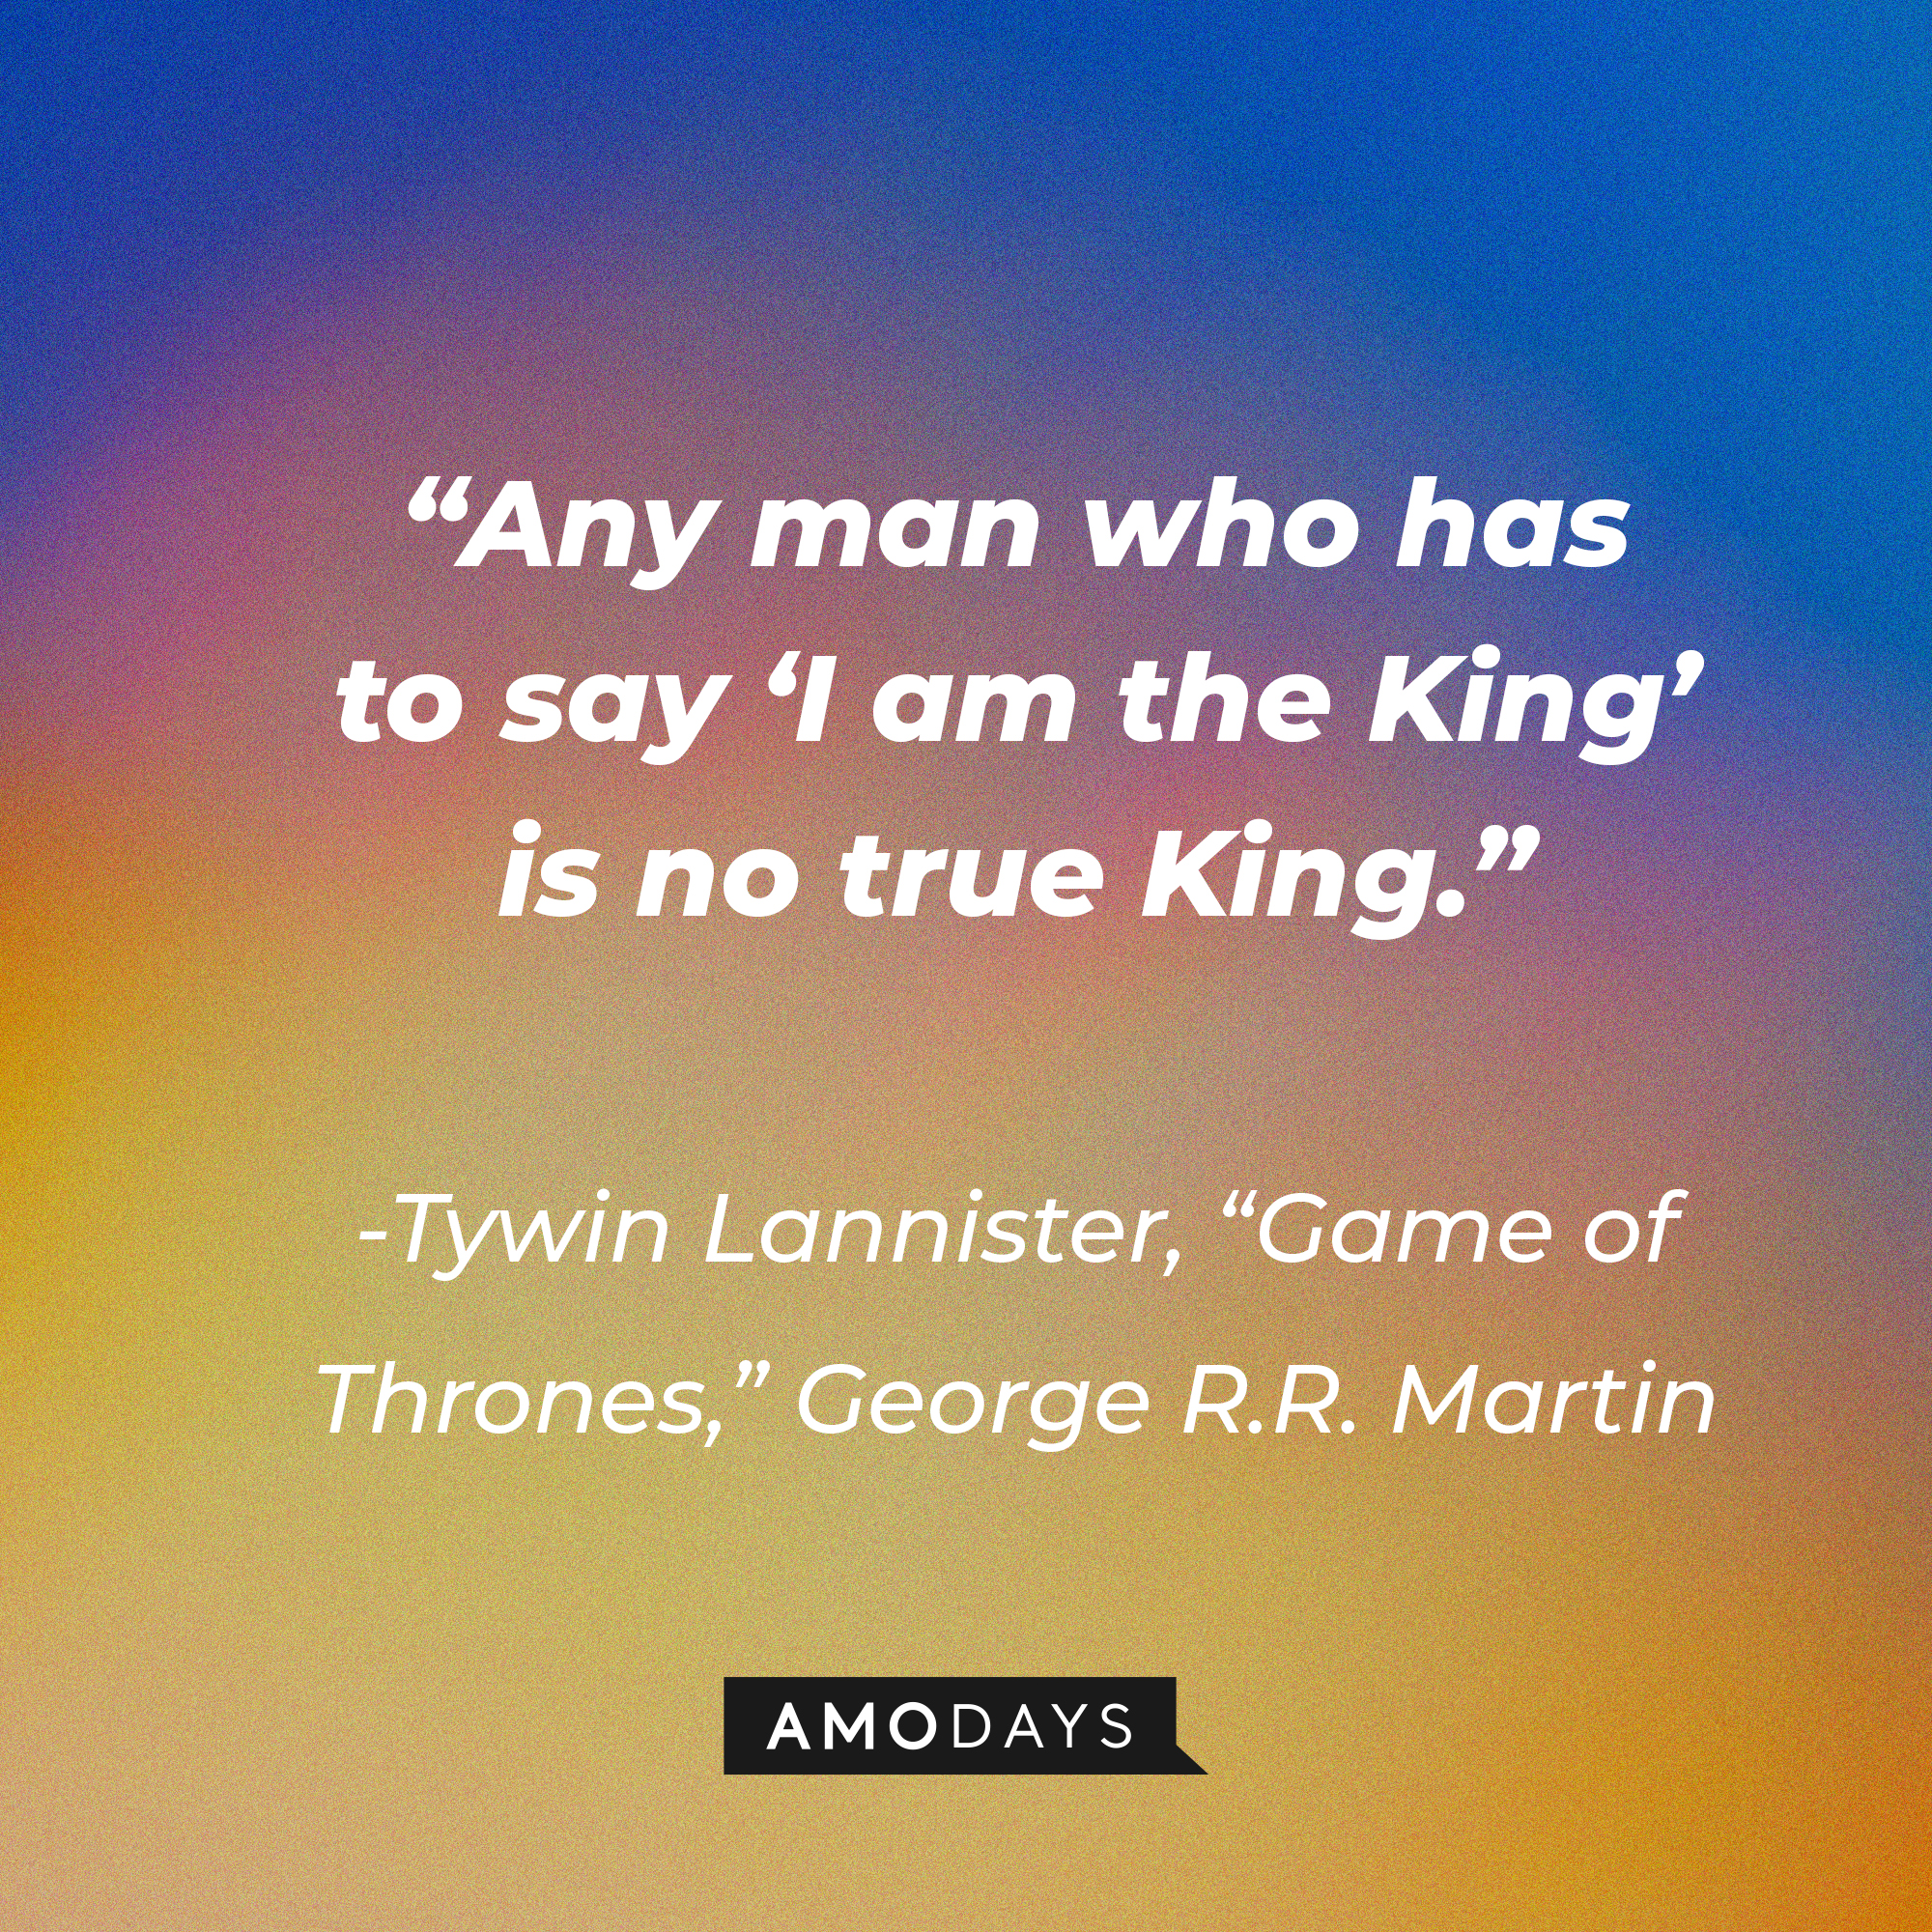 Tywin Lannister’s quote: “Any man who has to say ‘I am the King’ is no true King.” | Source: AmoDays